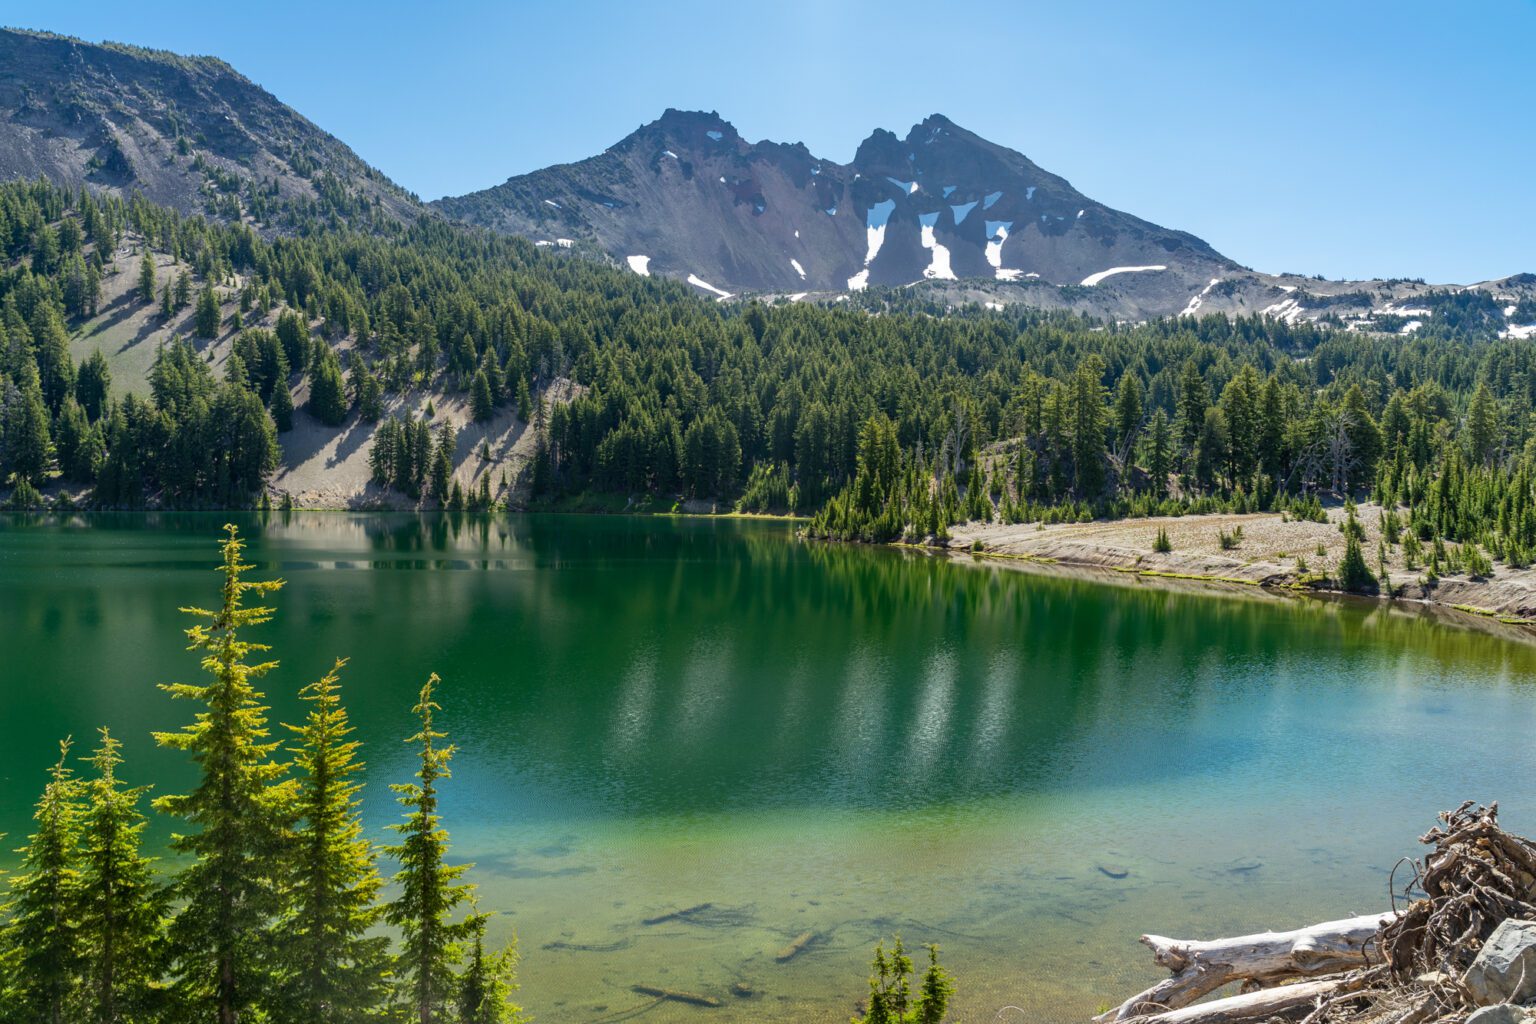 Hiking In Bend, Oregon: The 12 Best Hikes In Bend